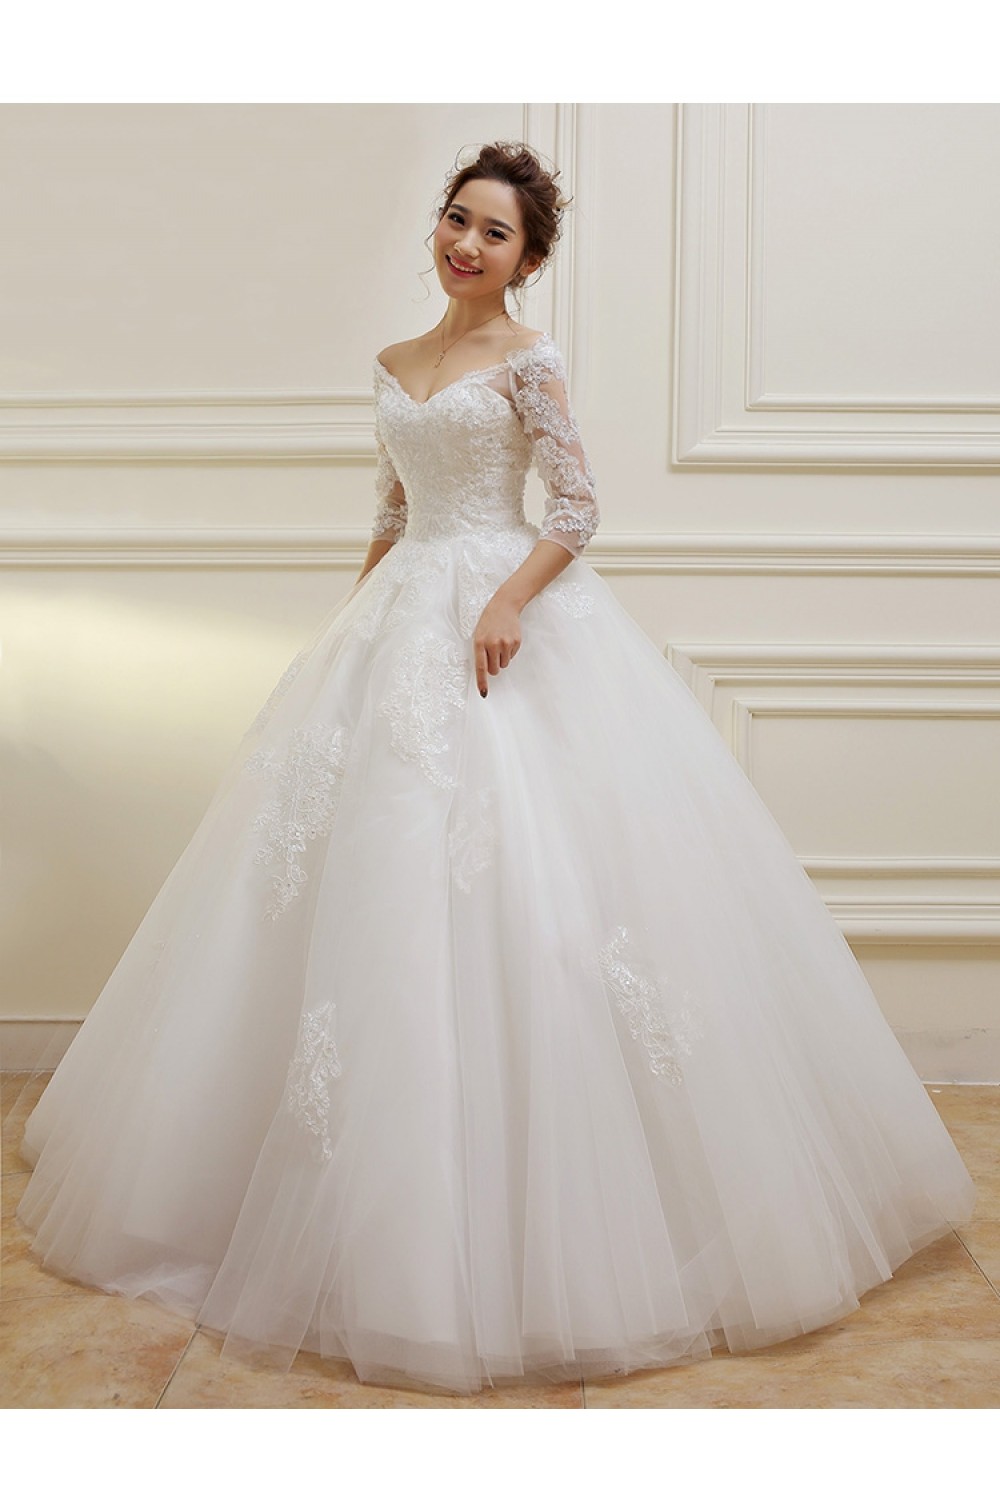 Romantic Look with Wedding Dress Lace Sleeves